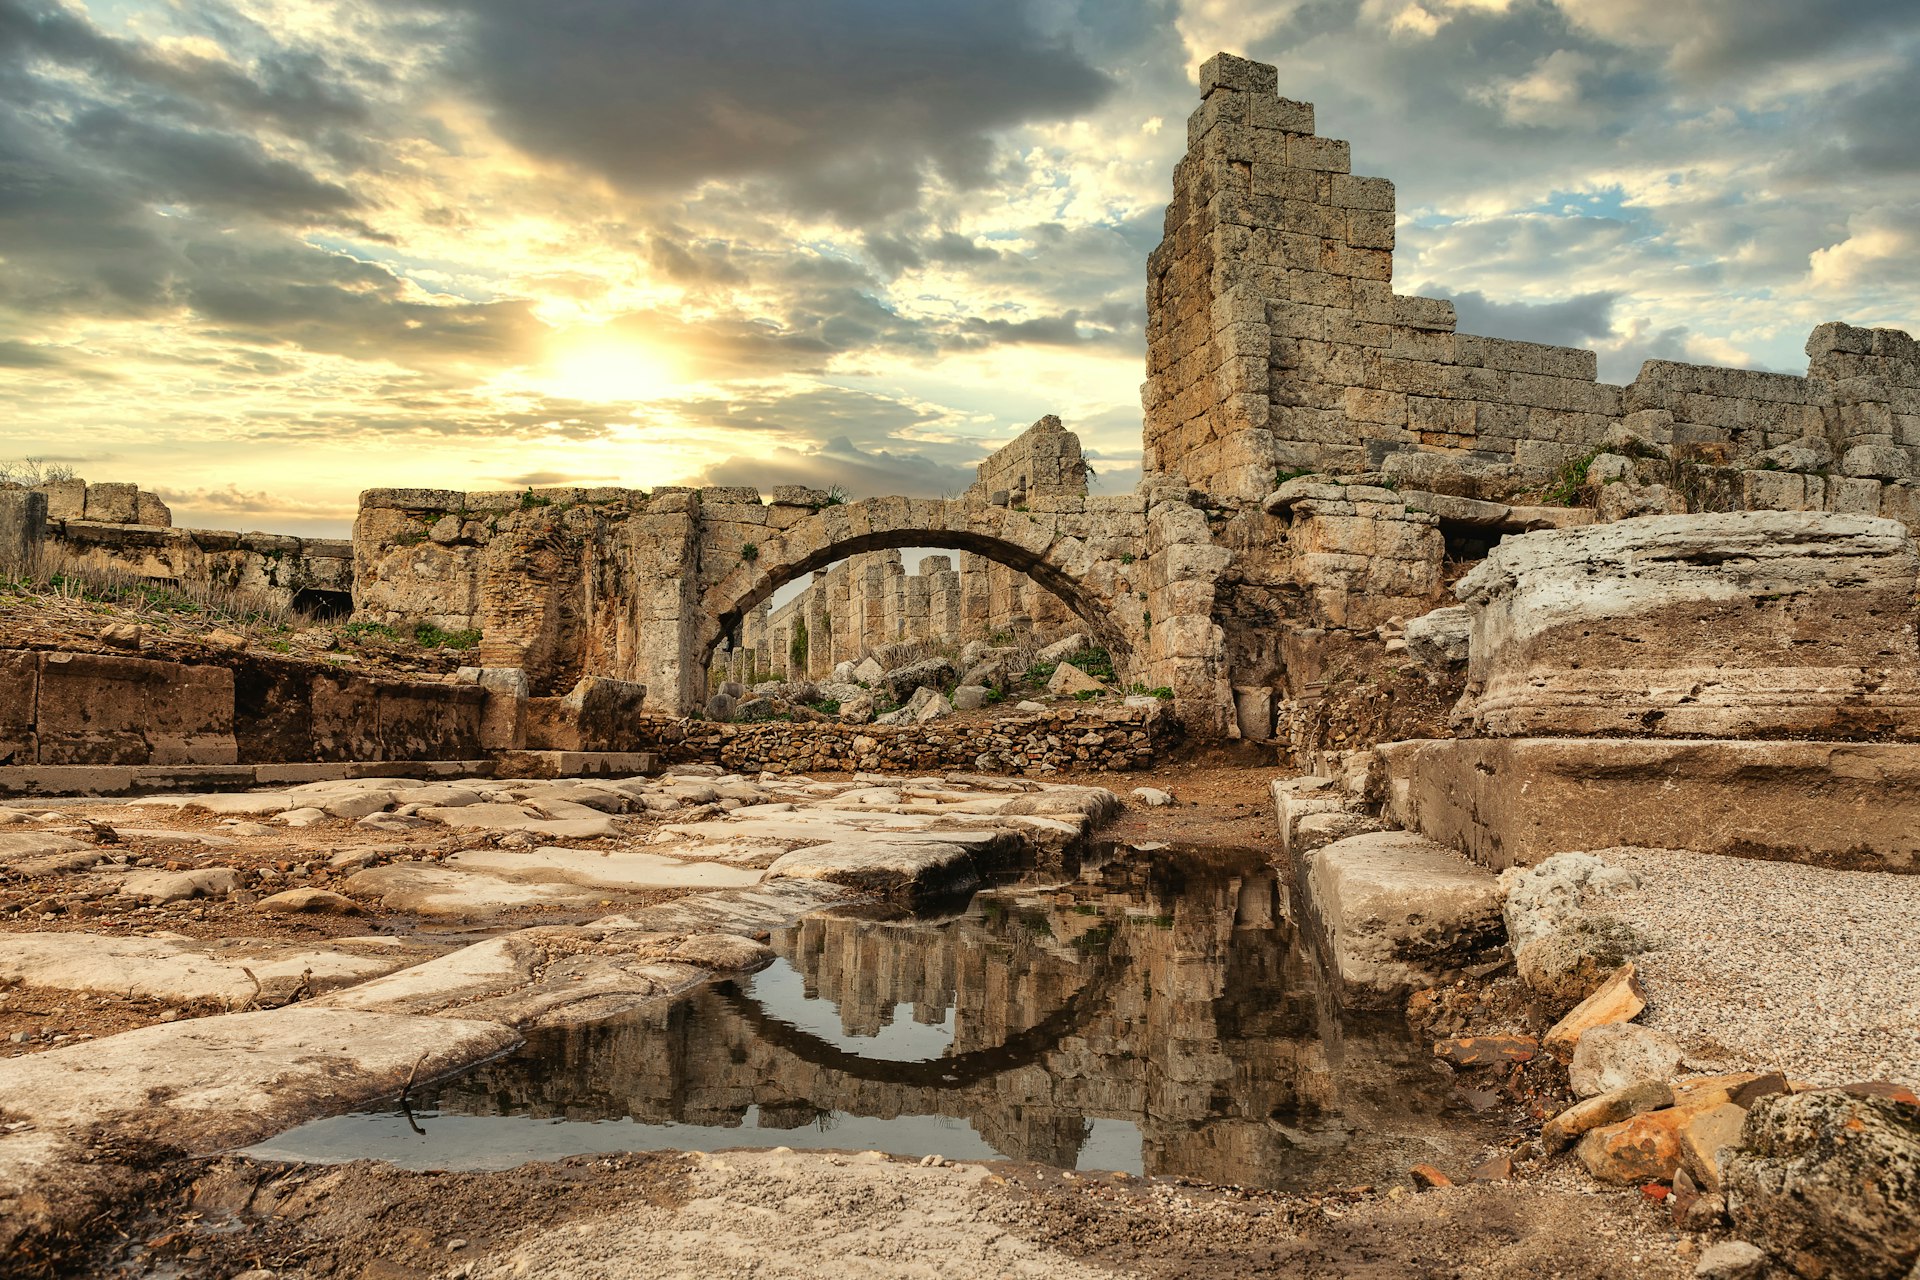 Crumbling ruins of the ancient city of Perge, Turkey